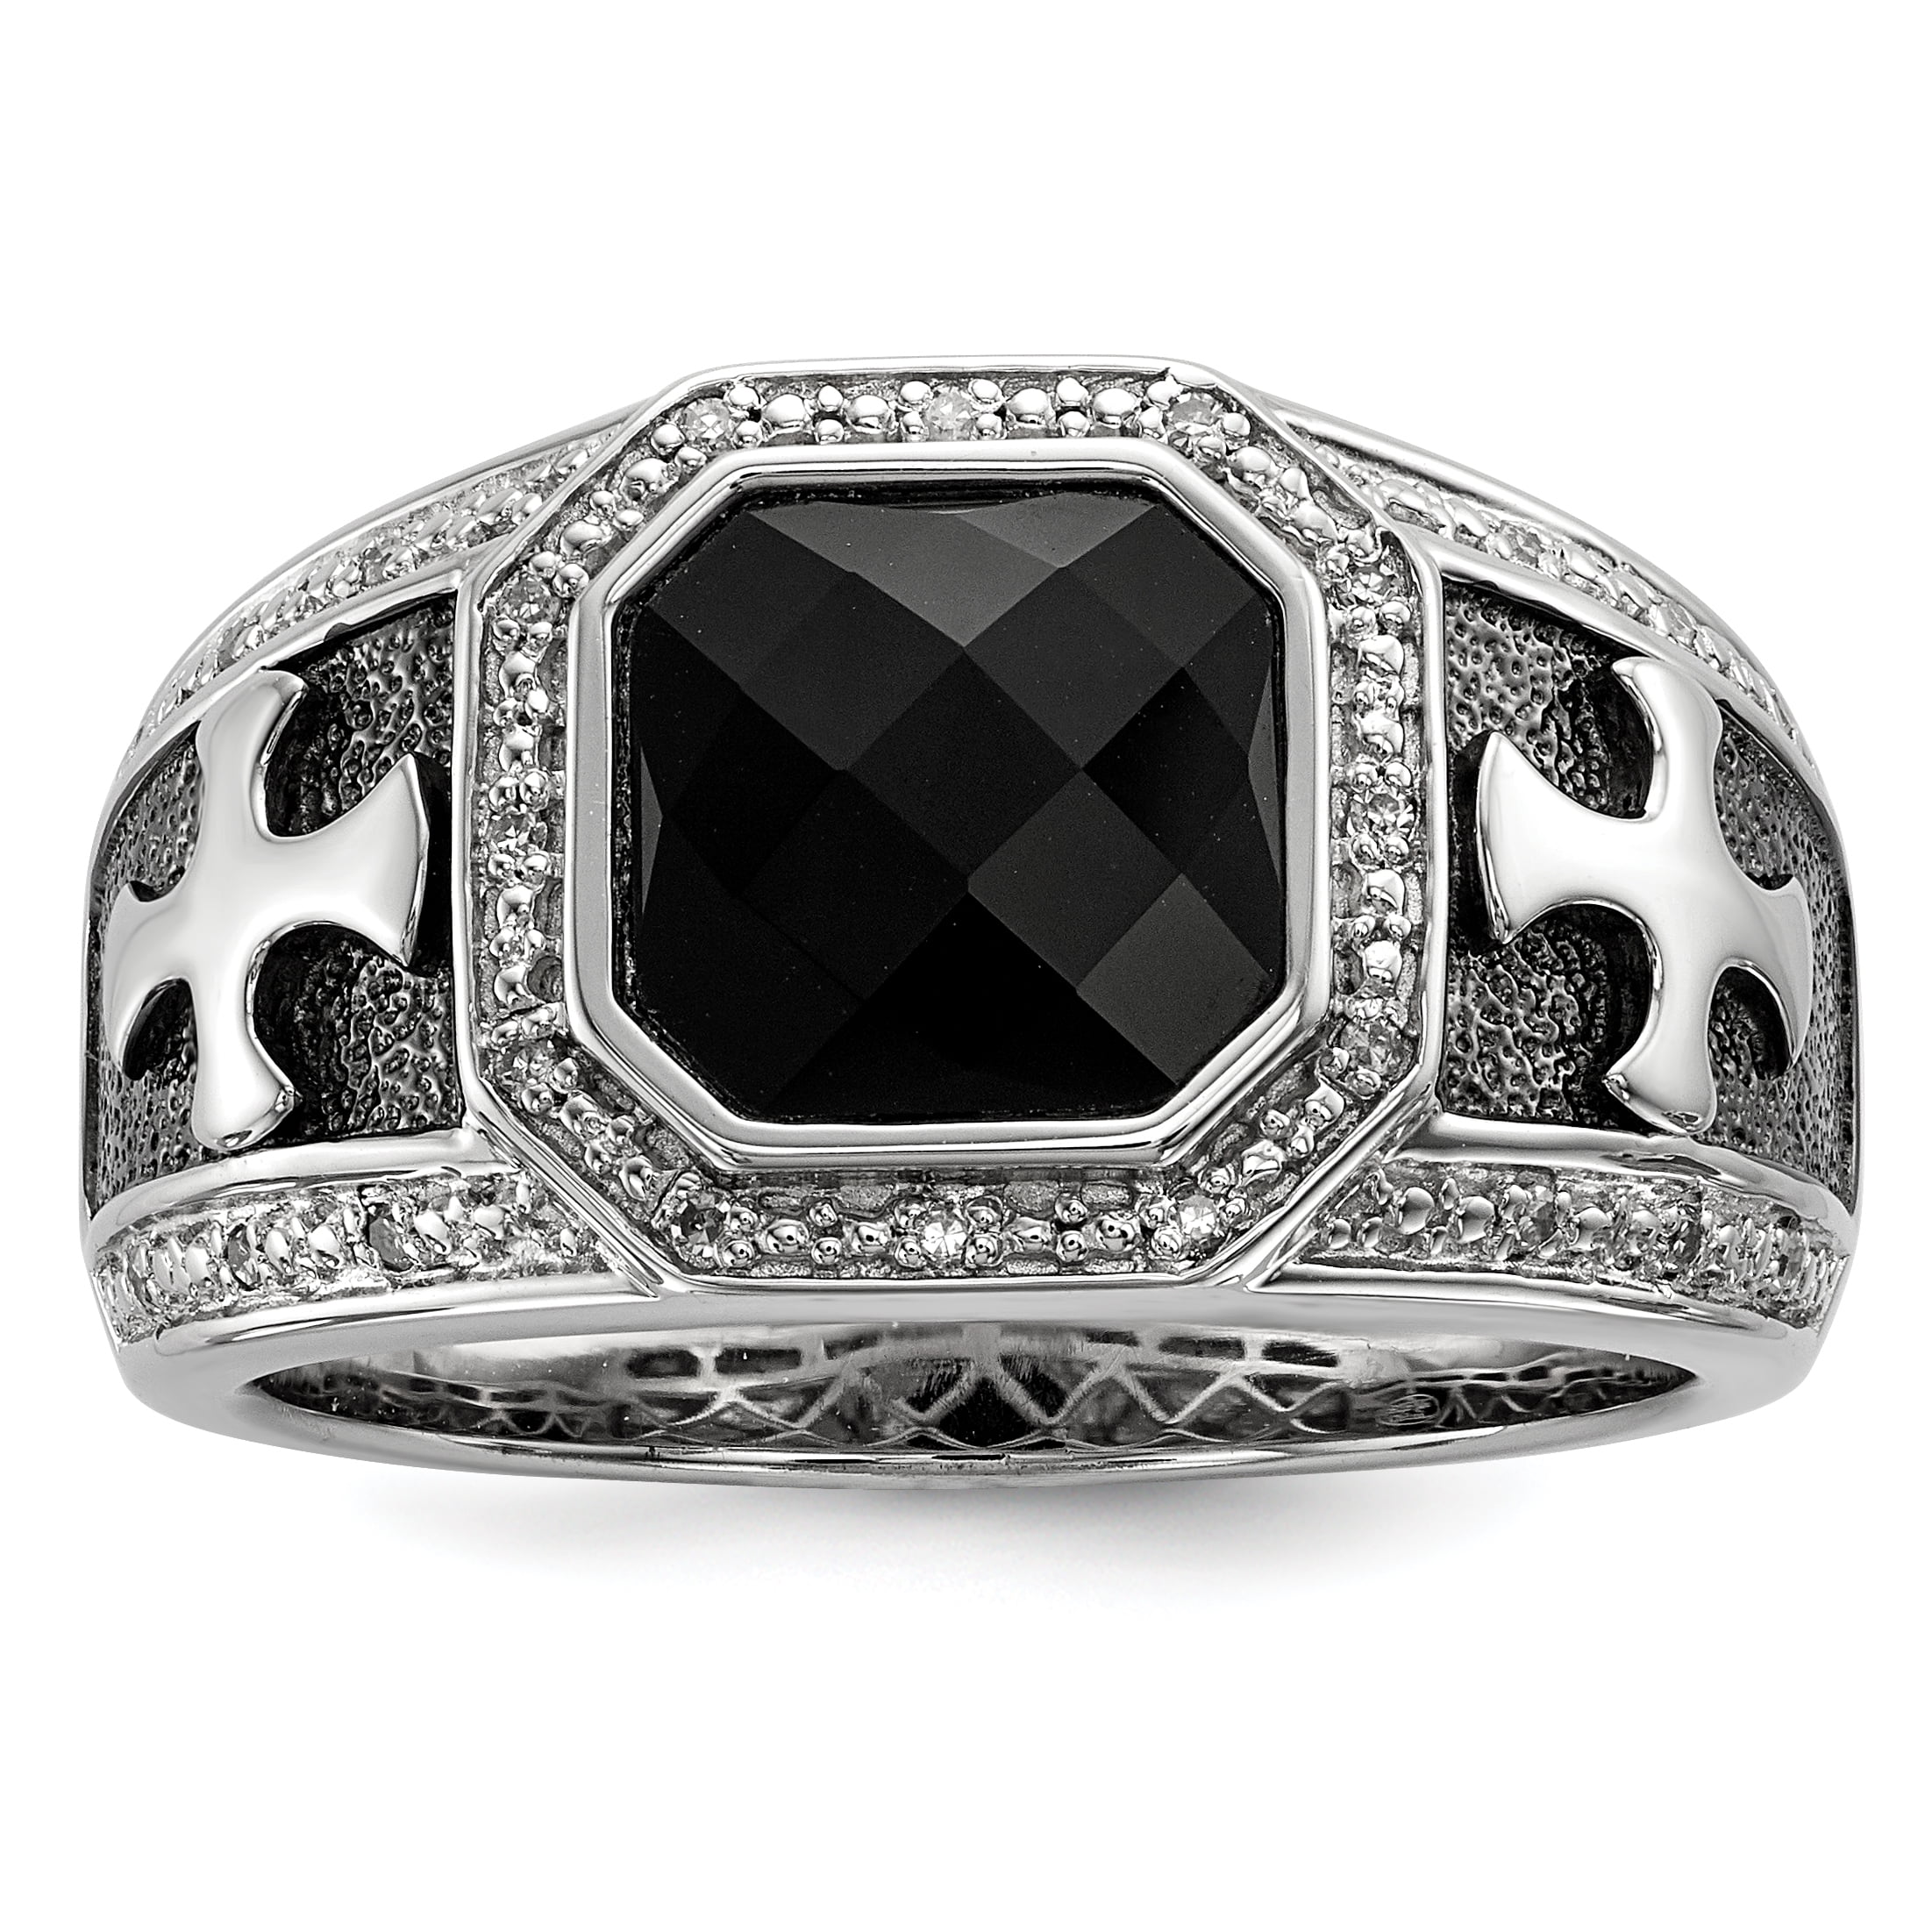 14K GOLD OVER STERLING SILVER  ONYX CROSS MENS RING SIZE 8 9 10 11 12 13 